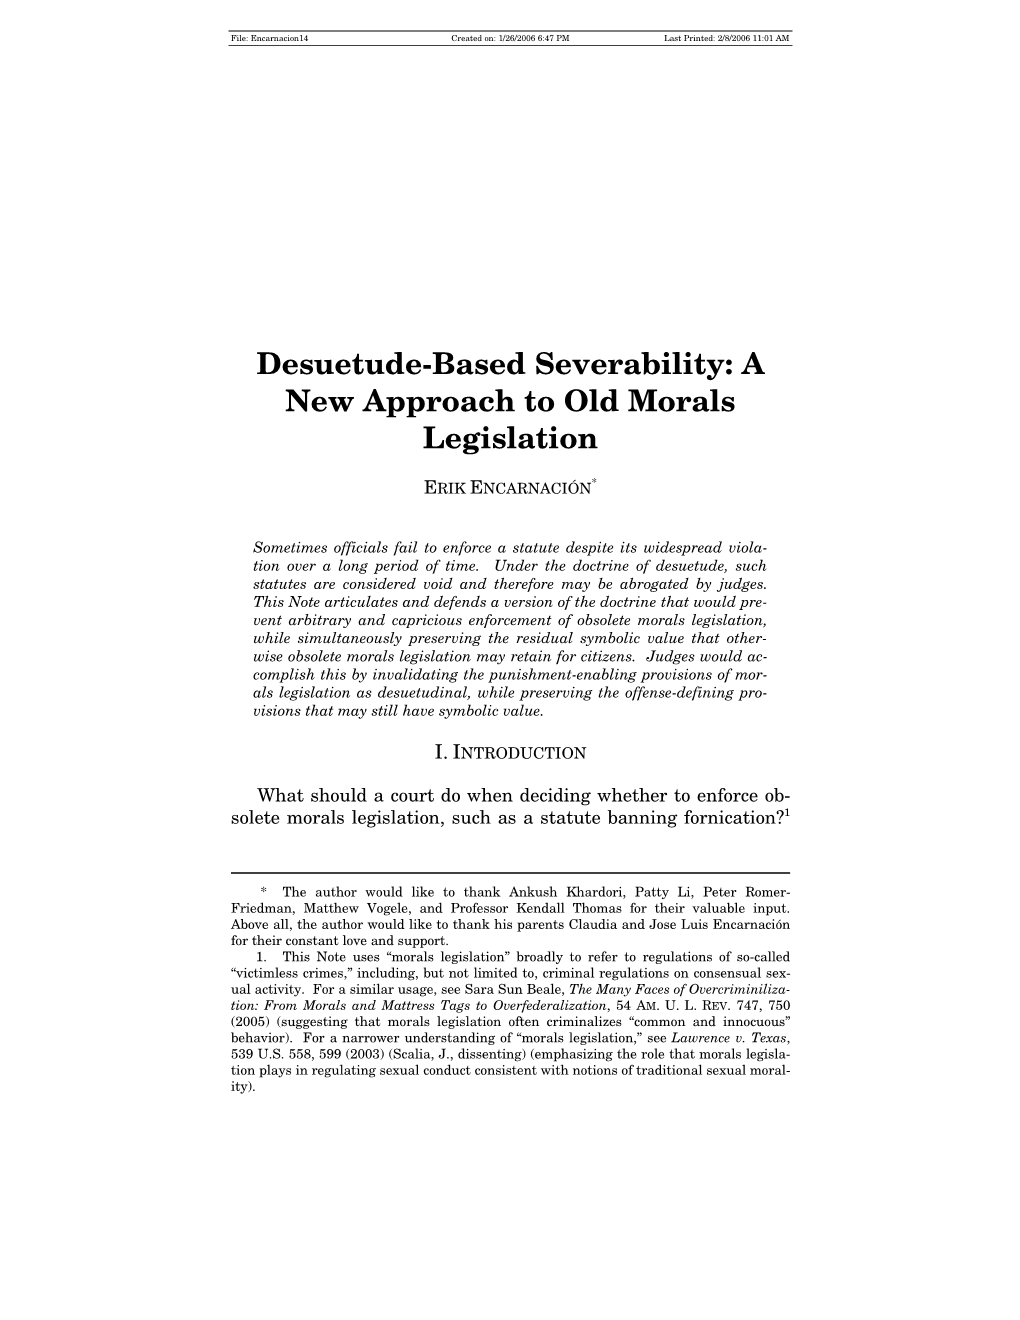 Desuetude-Based Severability: a New Approach to Old Morals Legislation